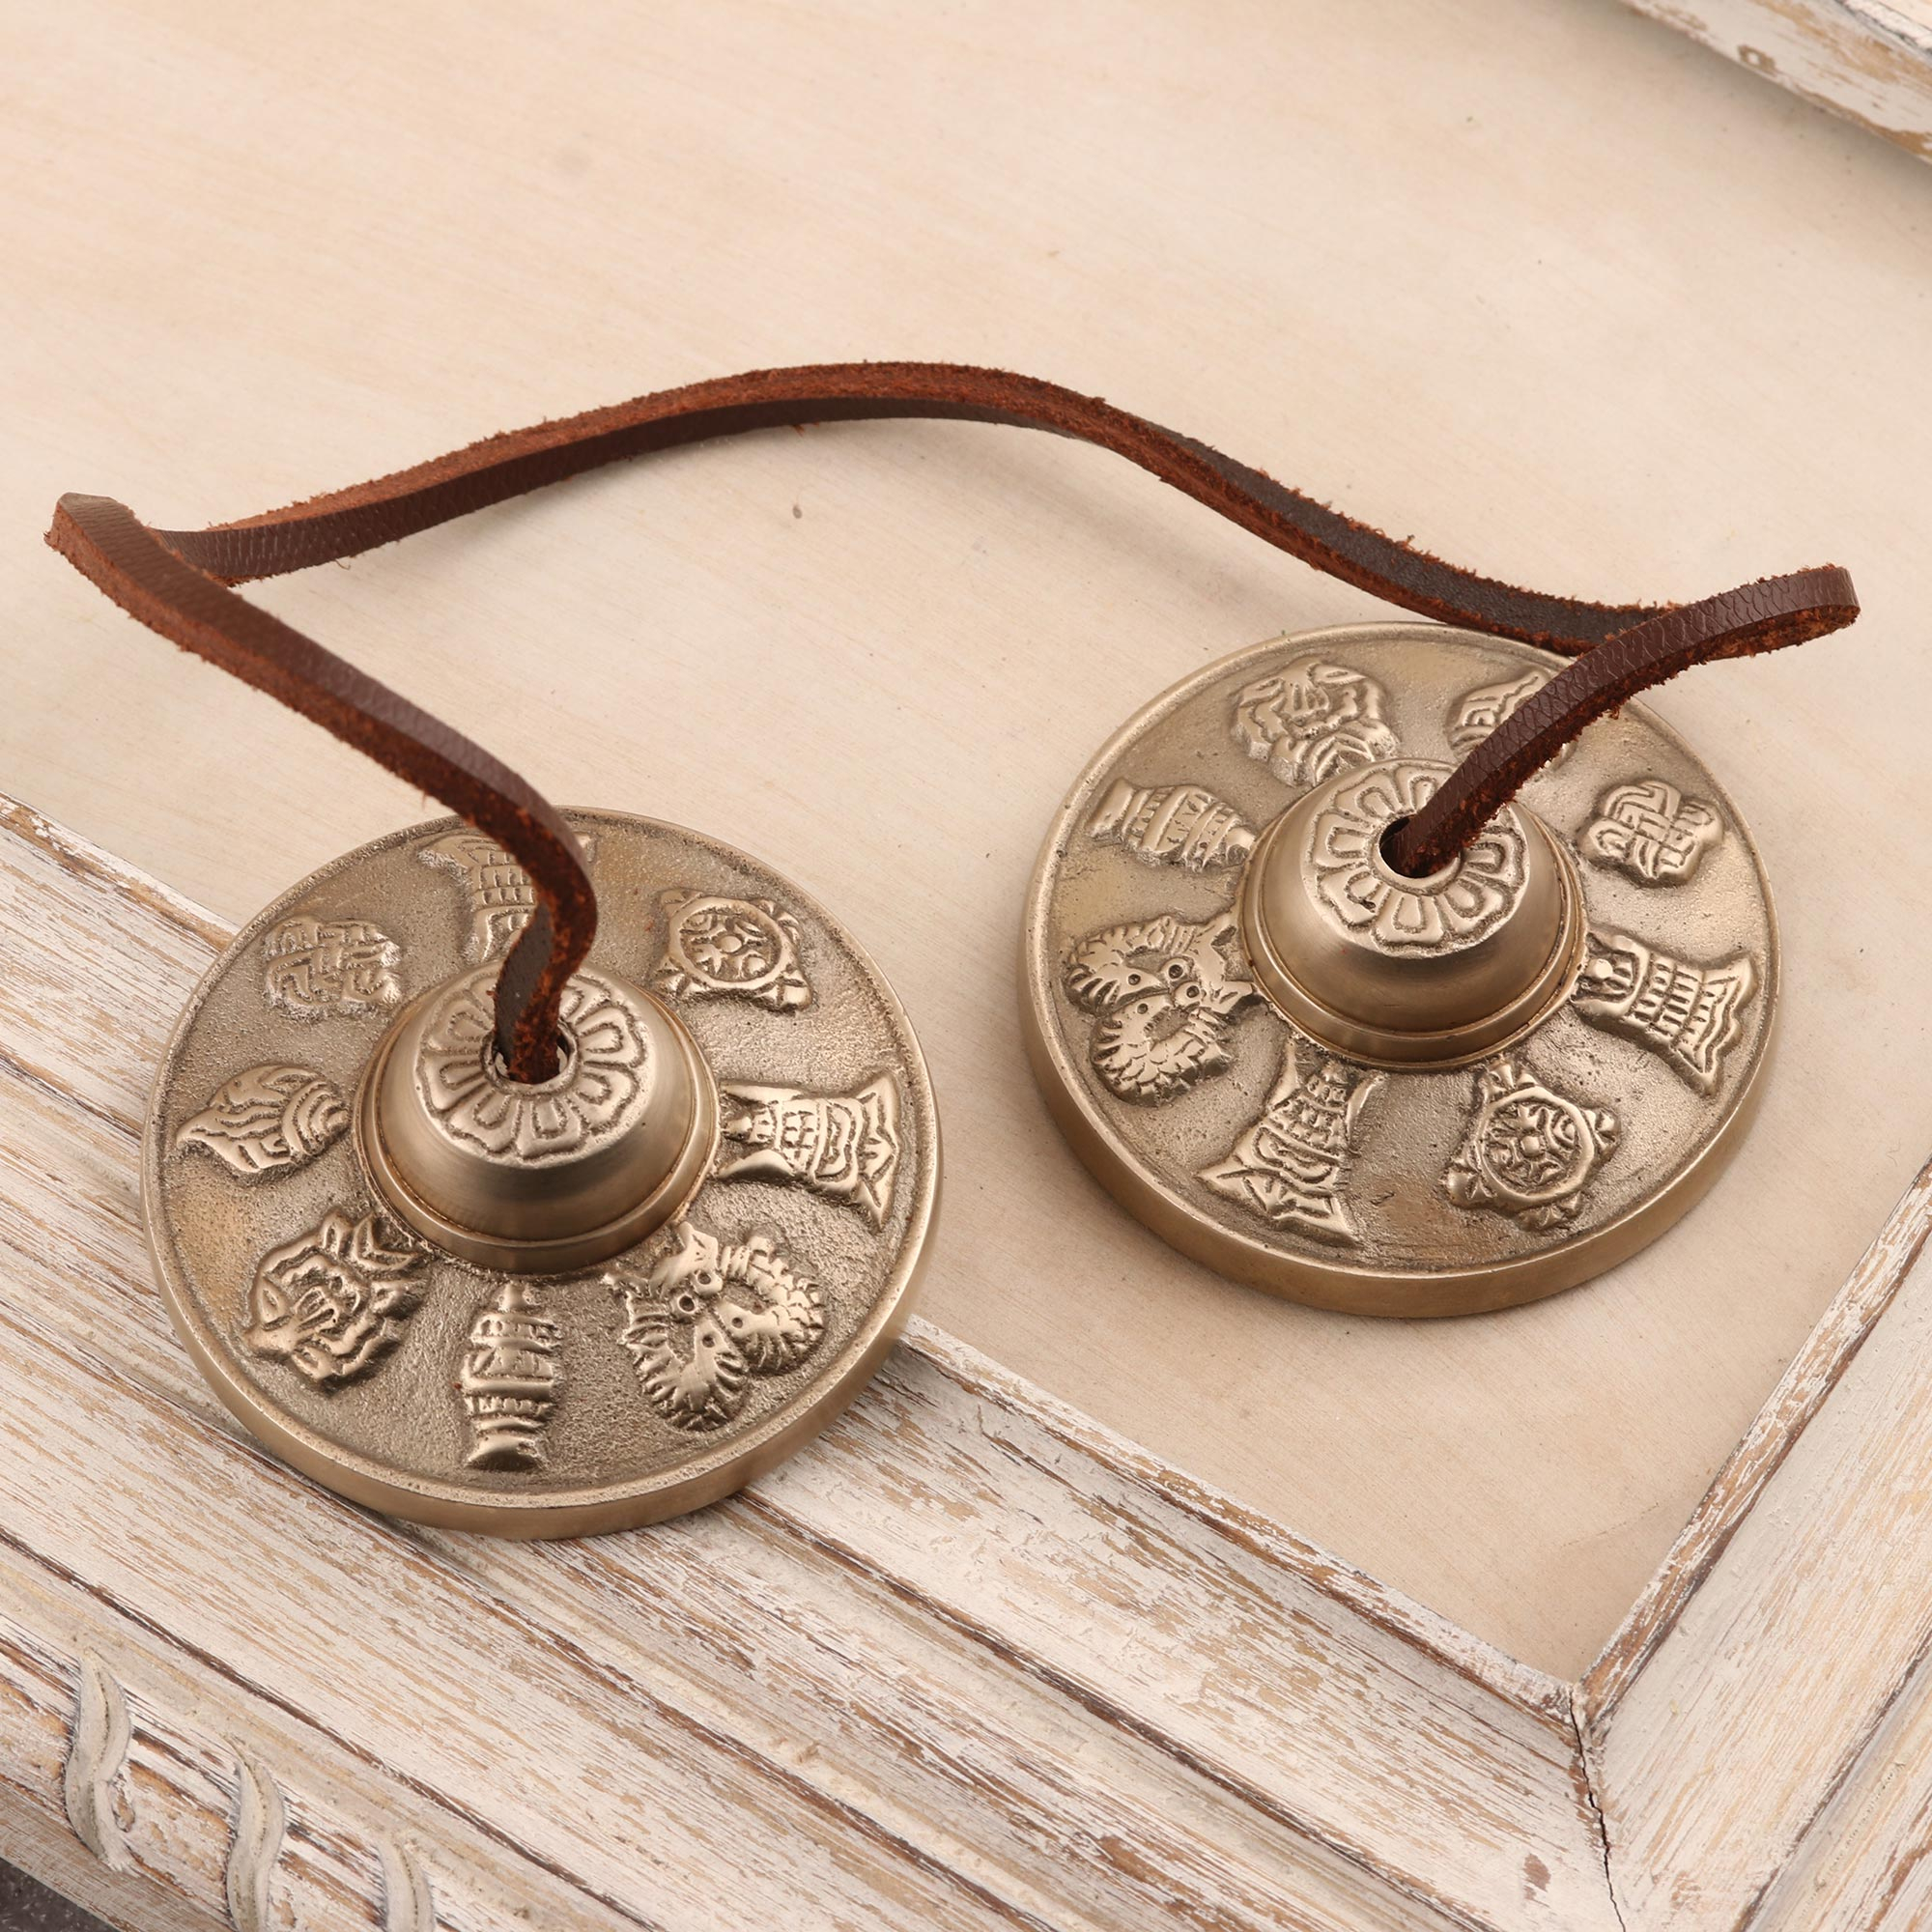 Artisan Crafted Decorative Brass Bell from India - Ring Theory